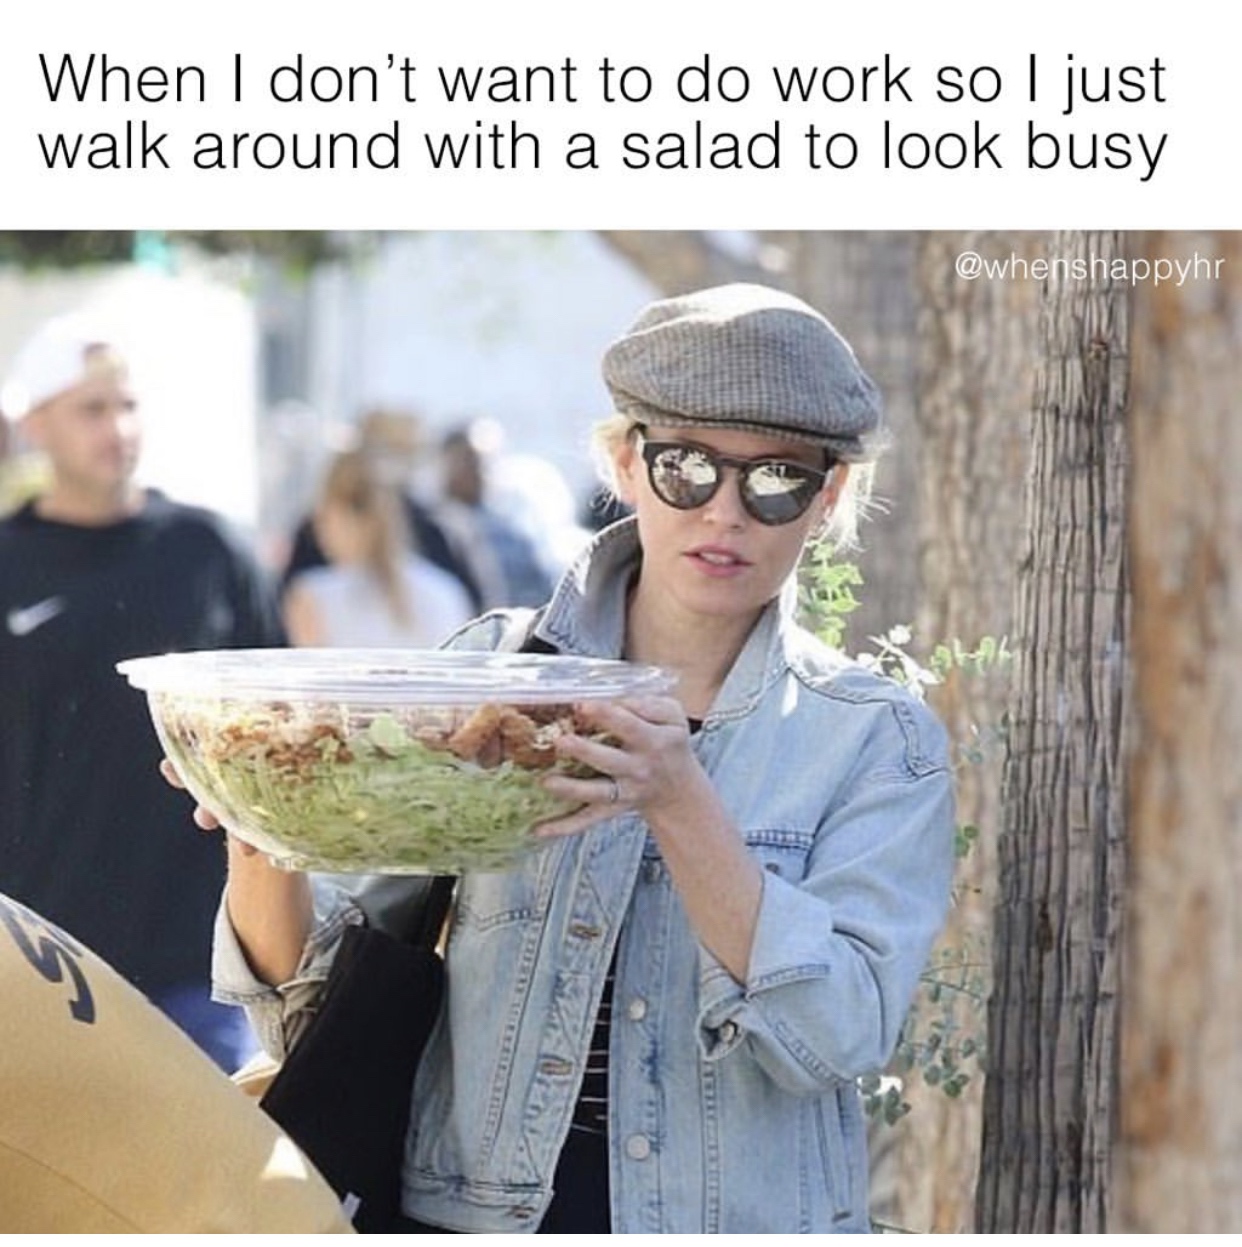 glasses - When I don't want to do work so I just walk around with a salad to look busy